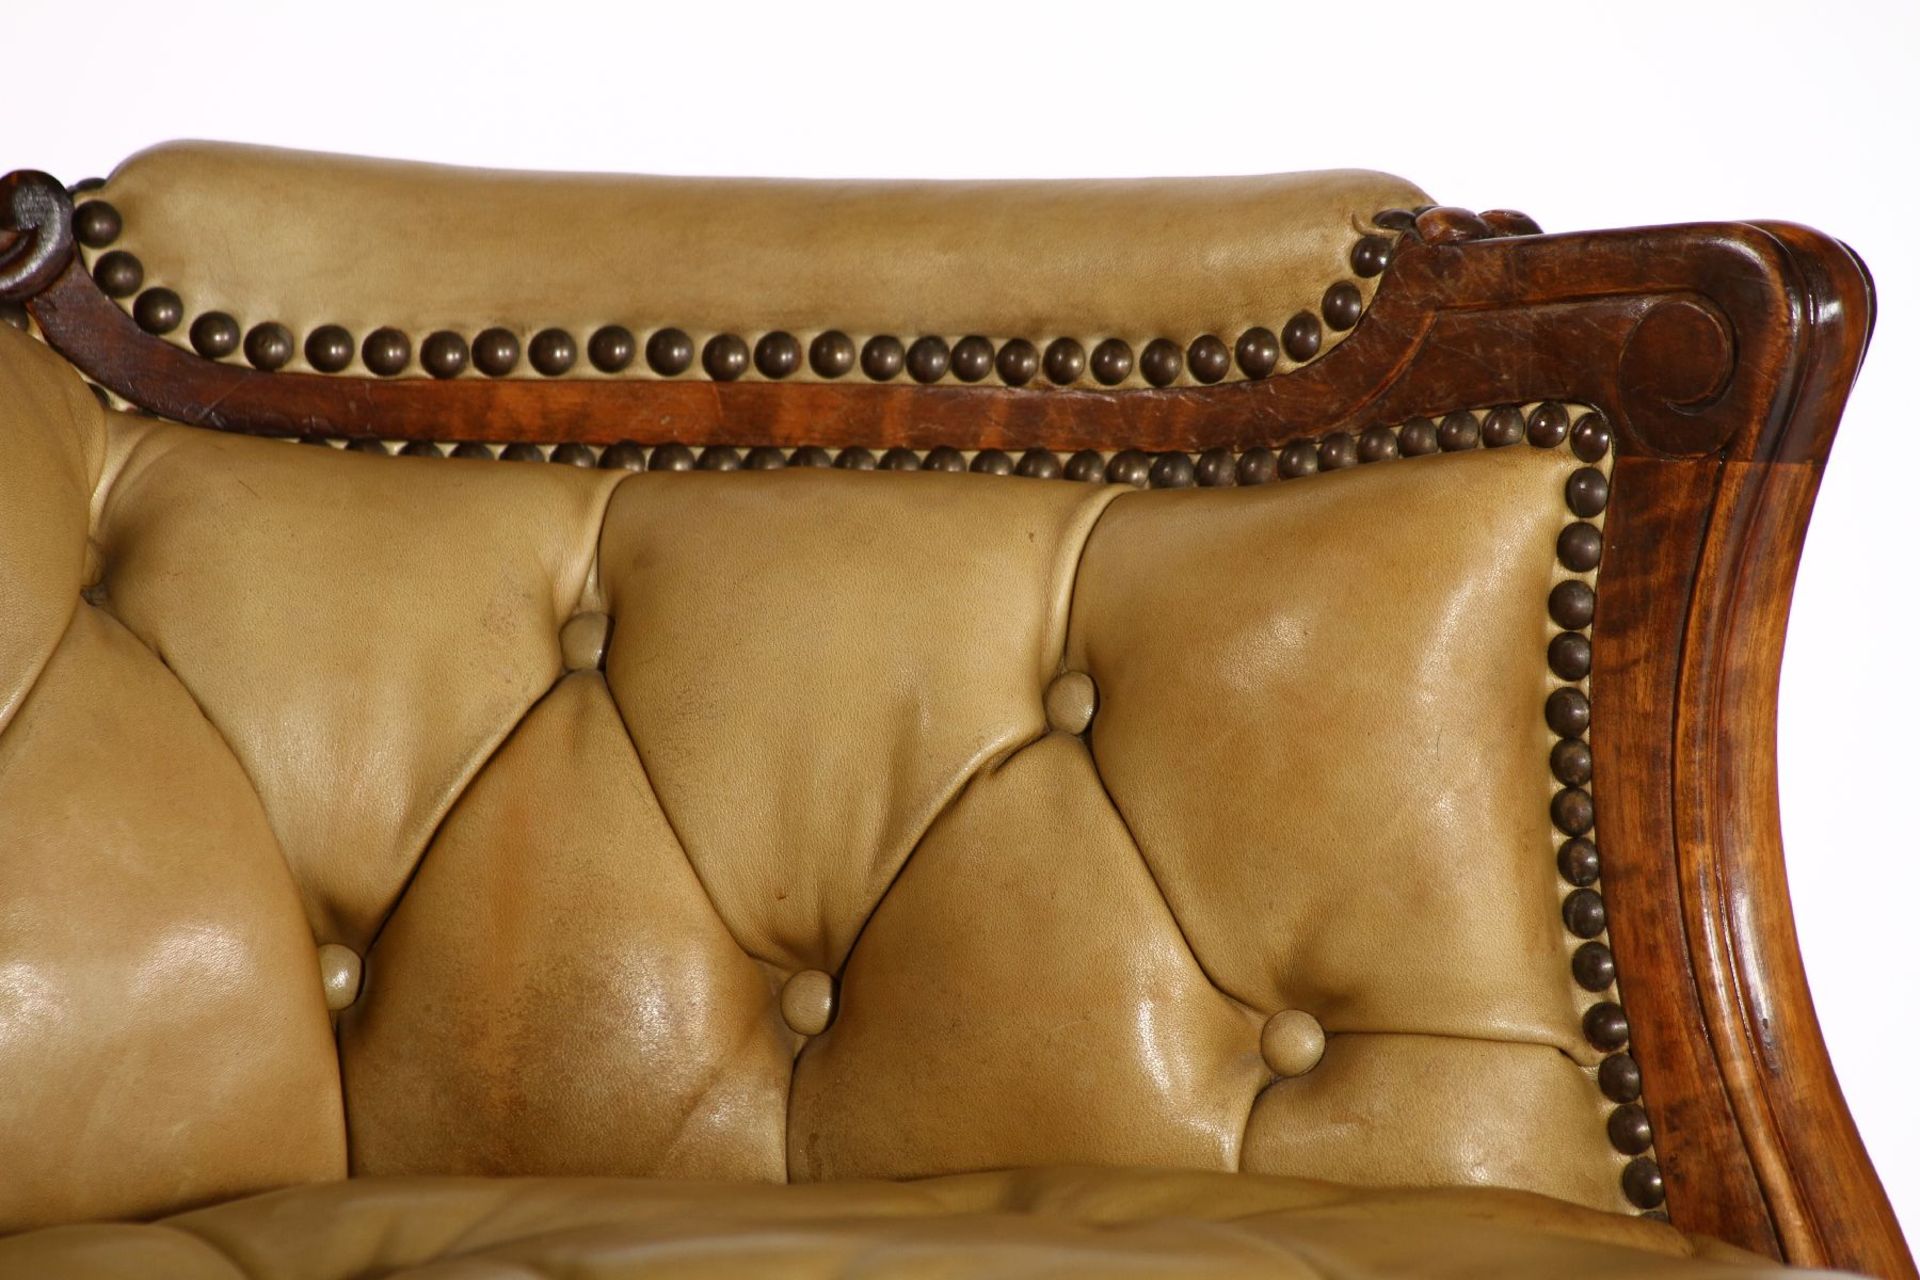 3-seater couch, solid walnut frame, yellow- green or olive leather upholstery, backrest and seat - Image 2 of 4